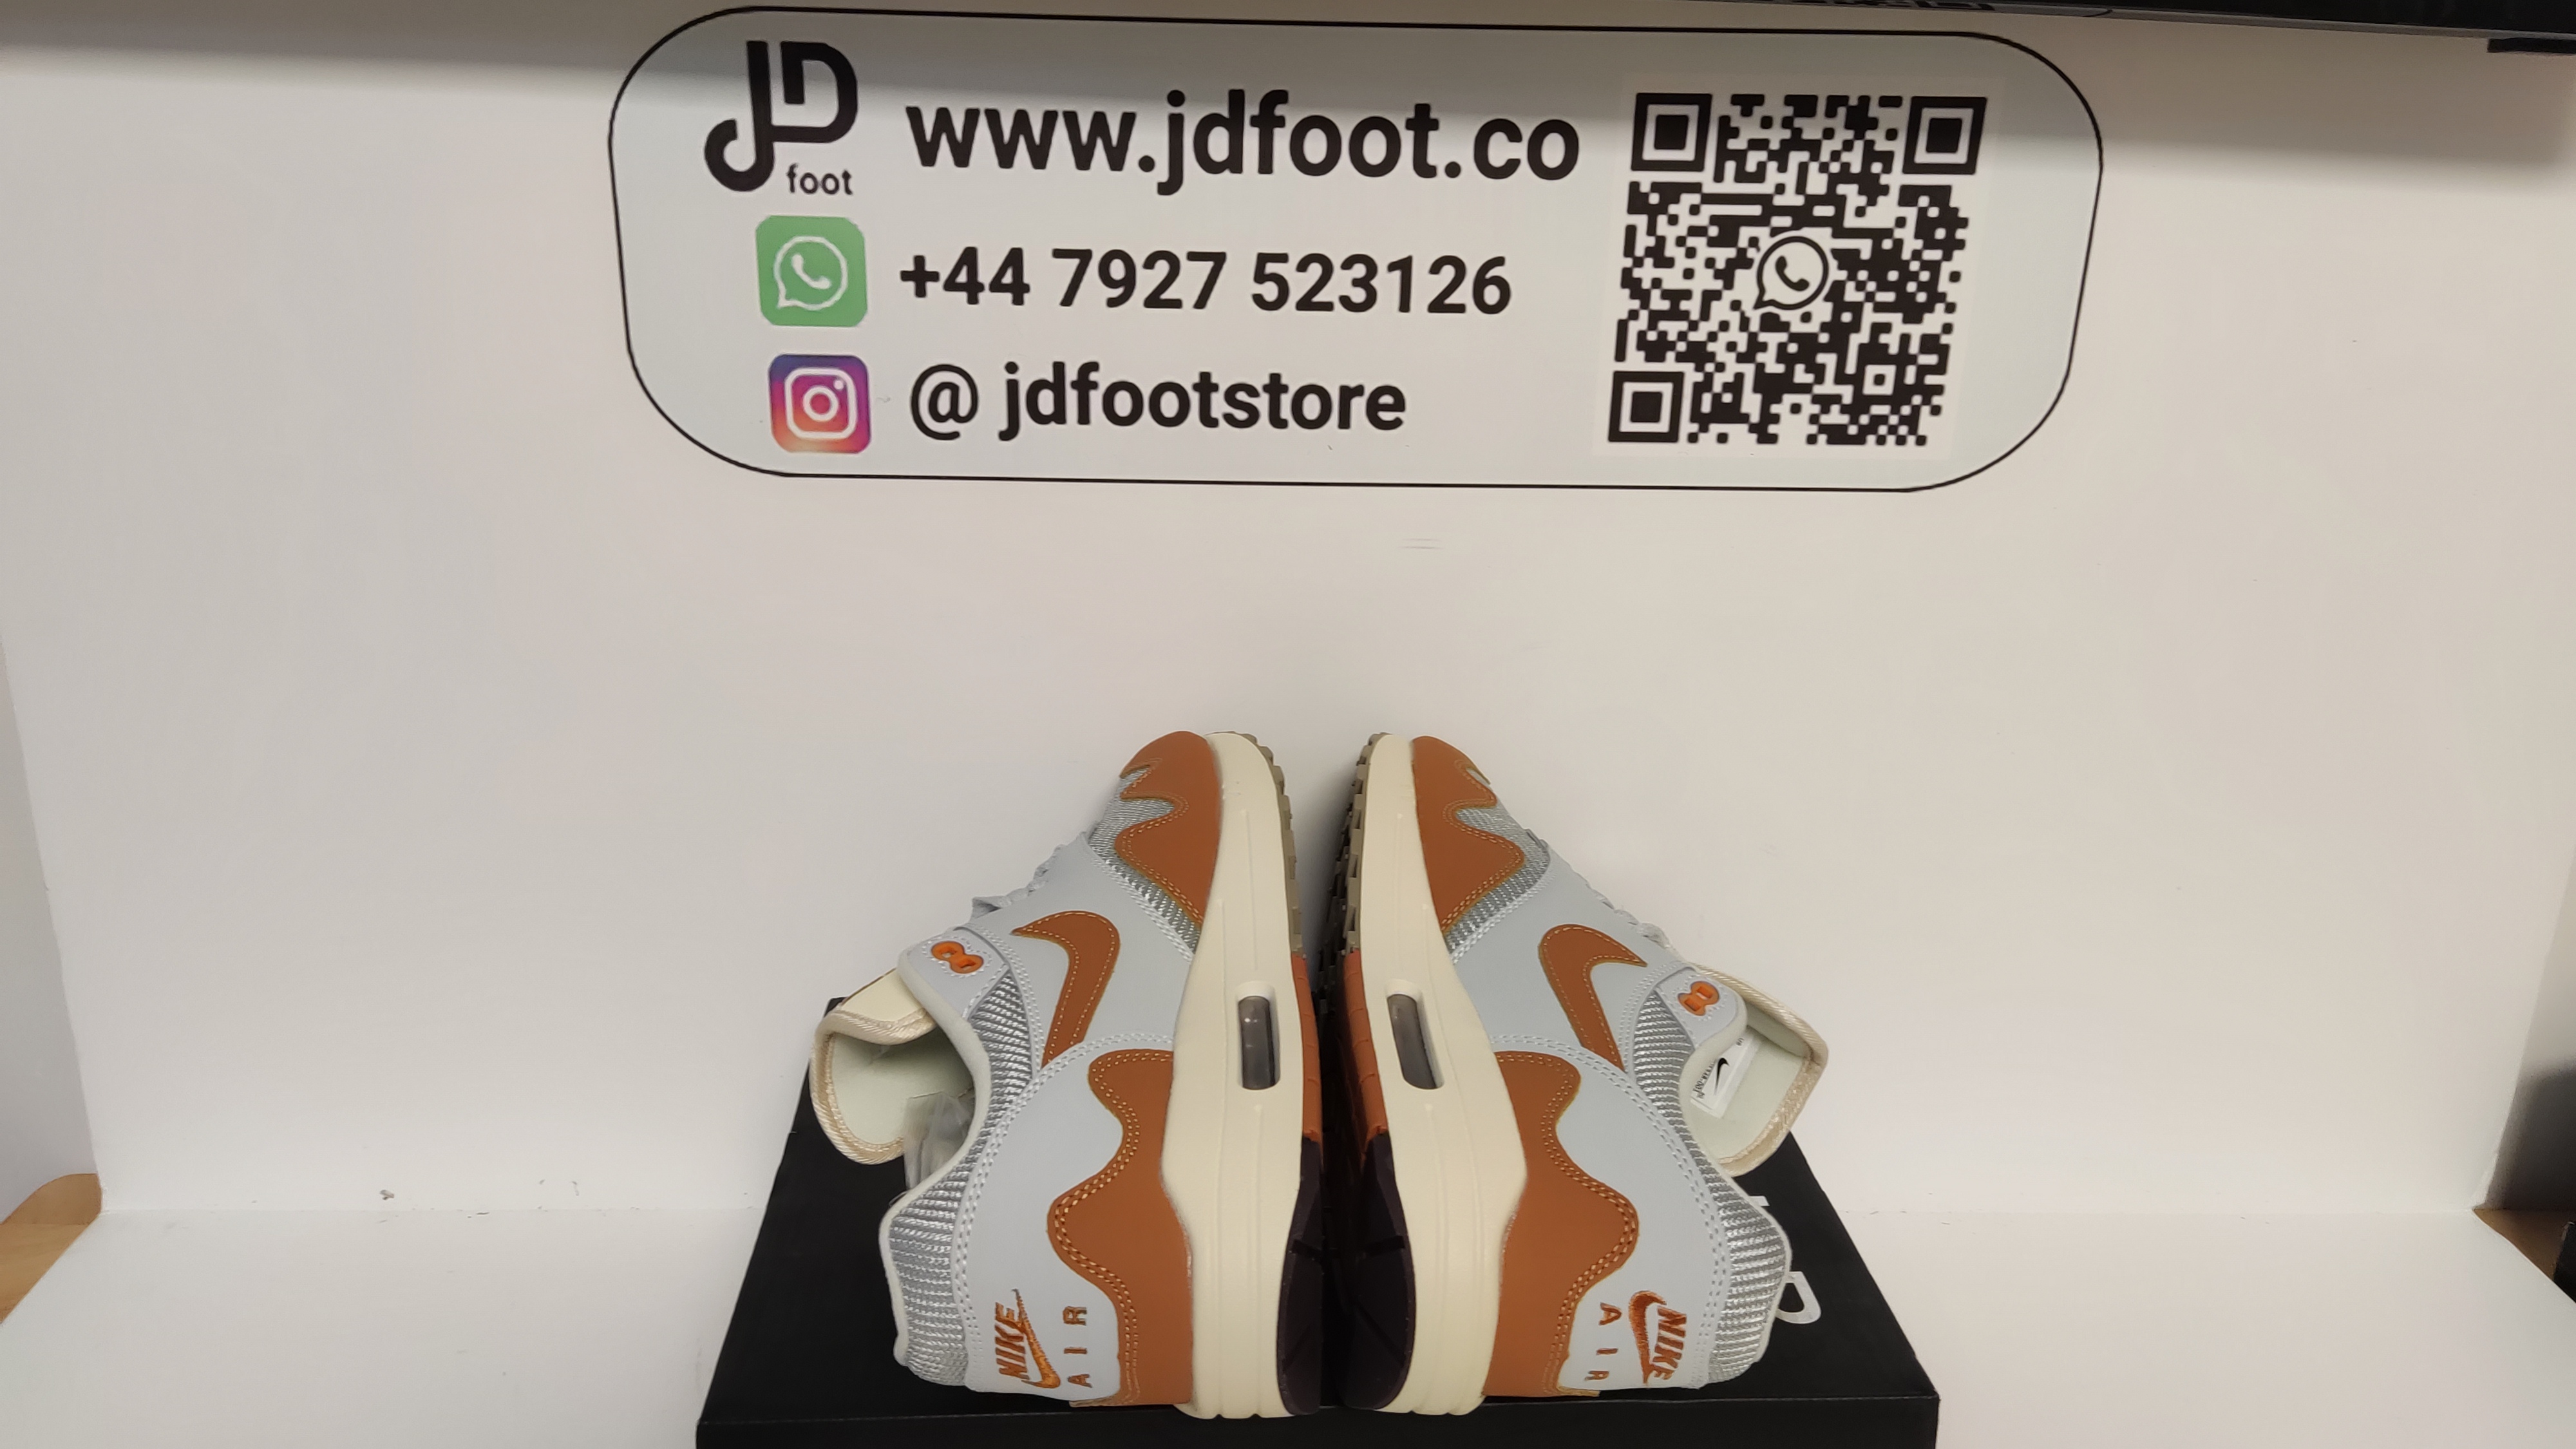 The Air Max 1 Replica Monarch Quality Check Picture From Jdfoot